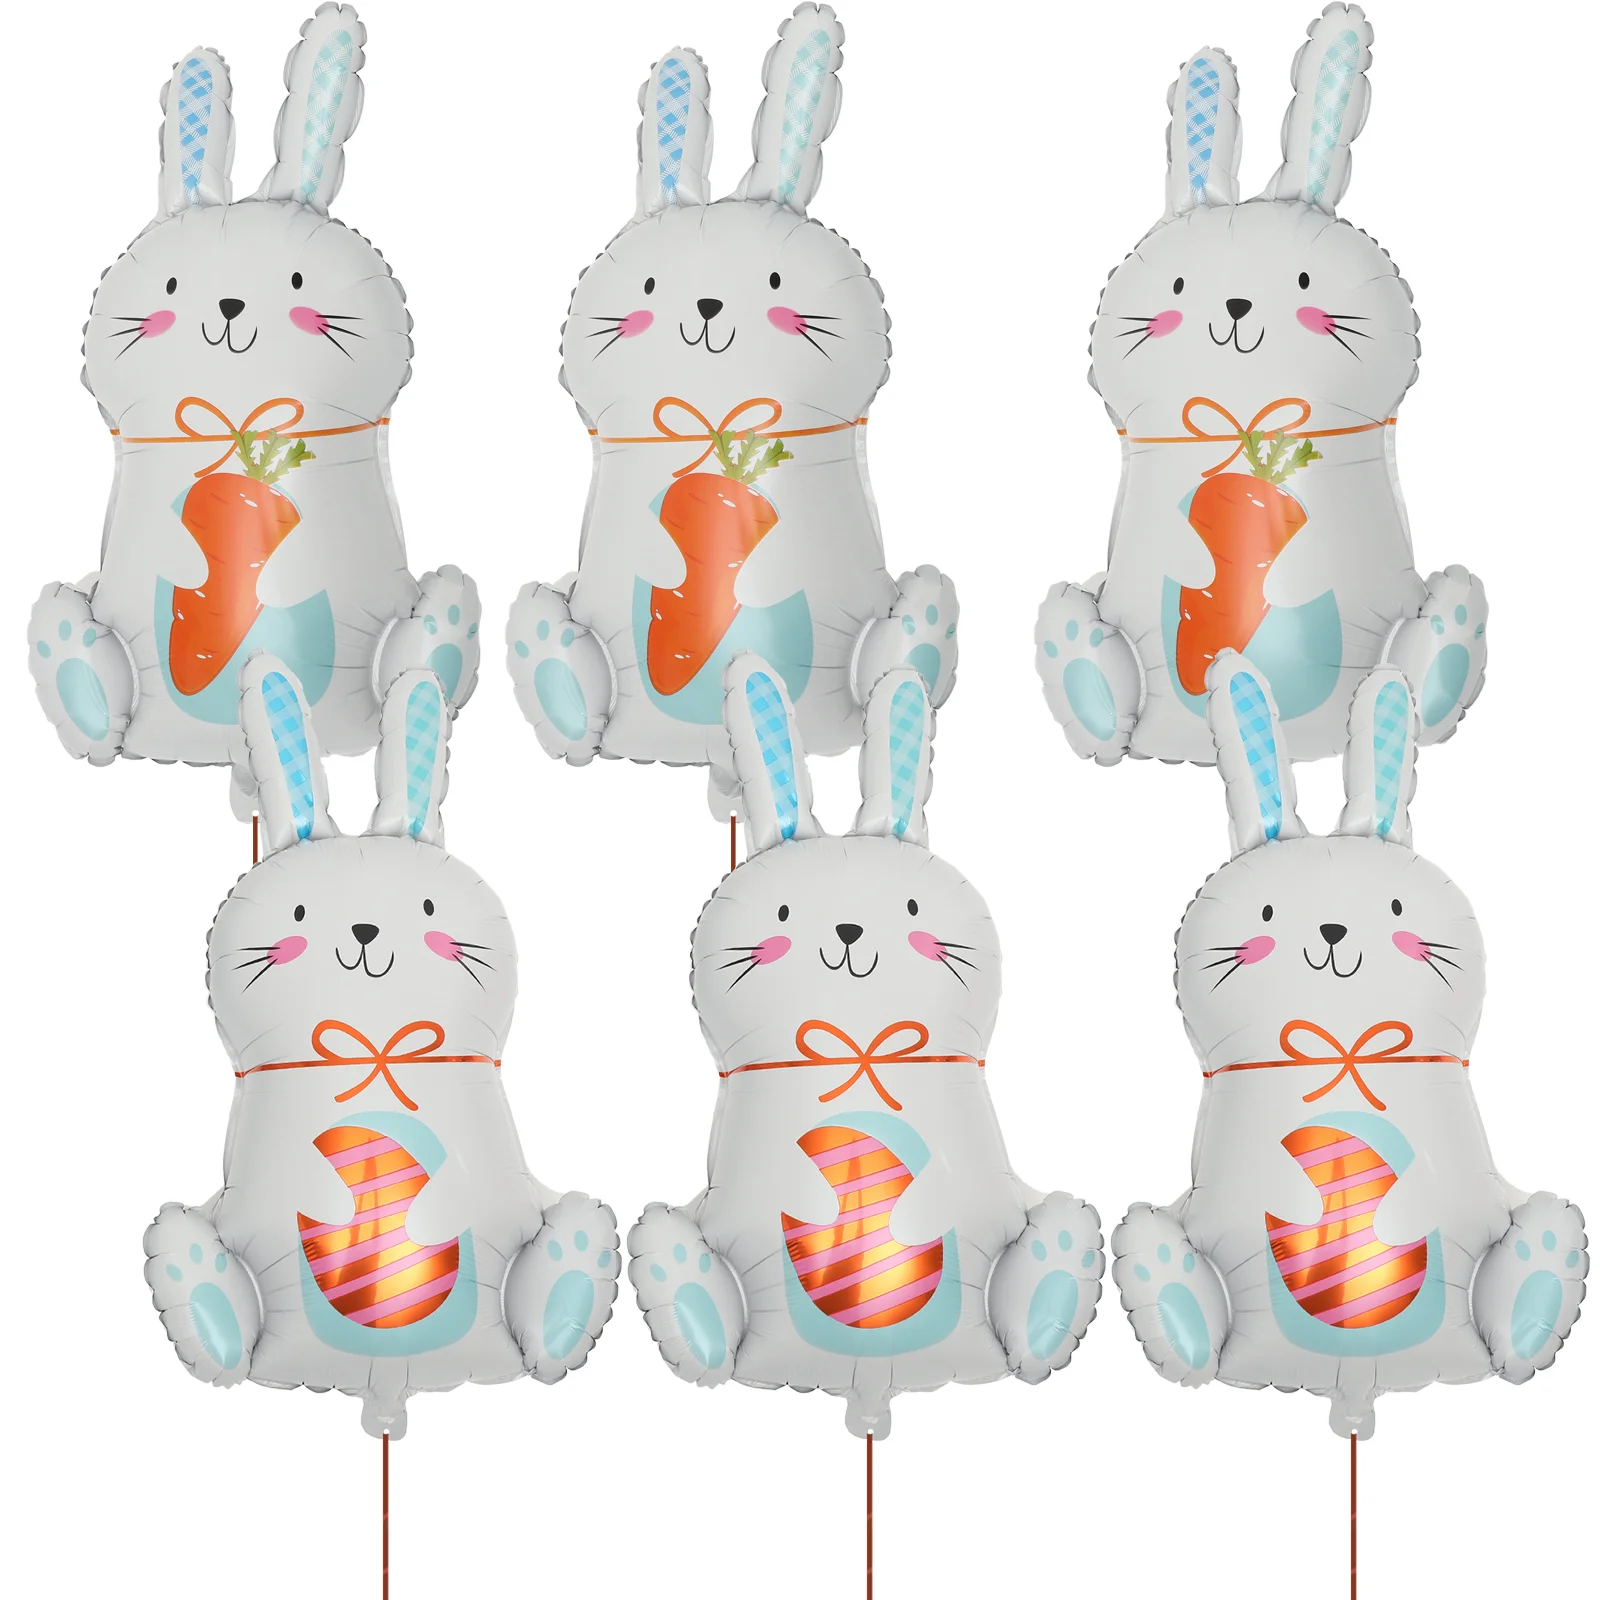 

Balloons Easter Balloon Rabbit Bunny Decorations Head Helium Cartoon Carrot Shaped Happy Decoration Large Forest Kids Birthday